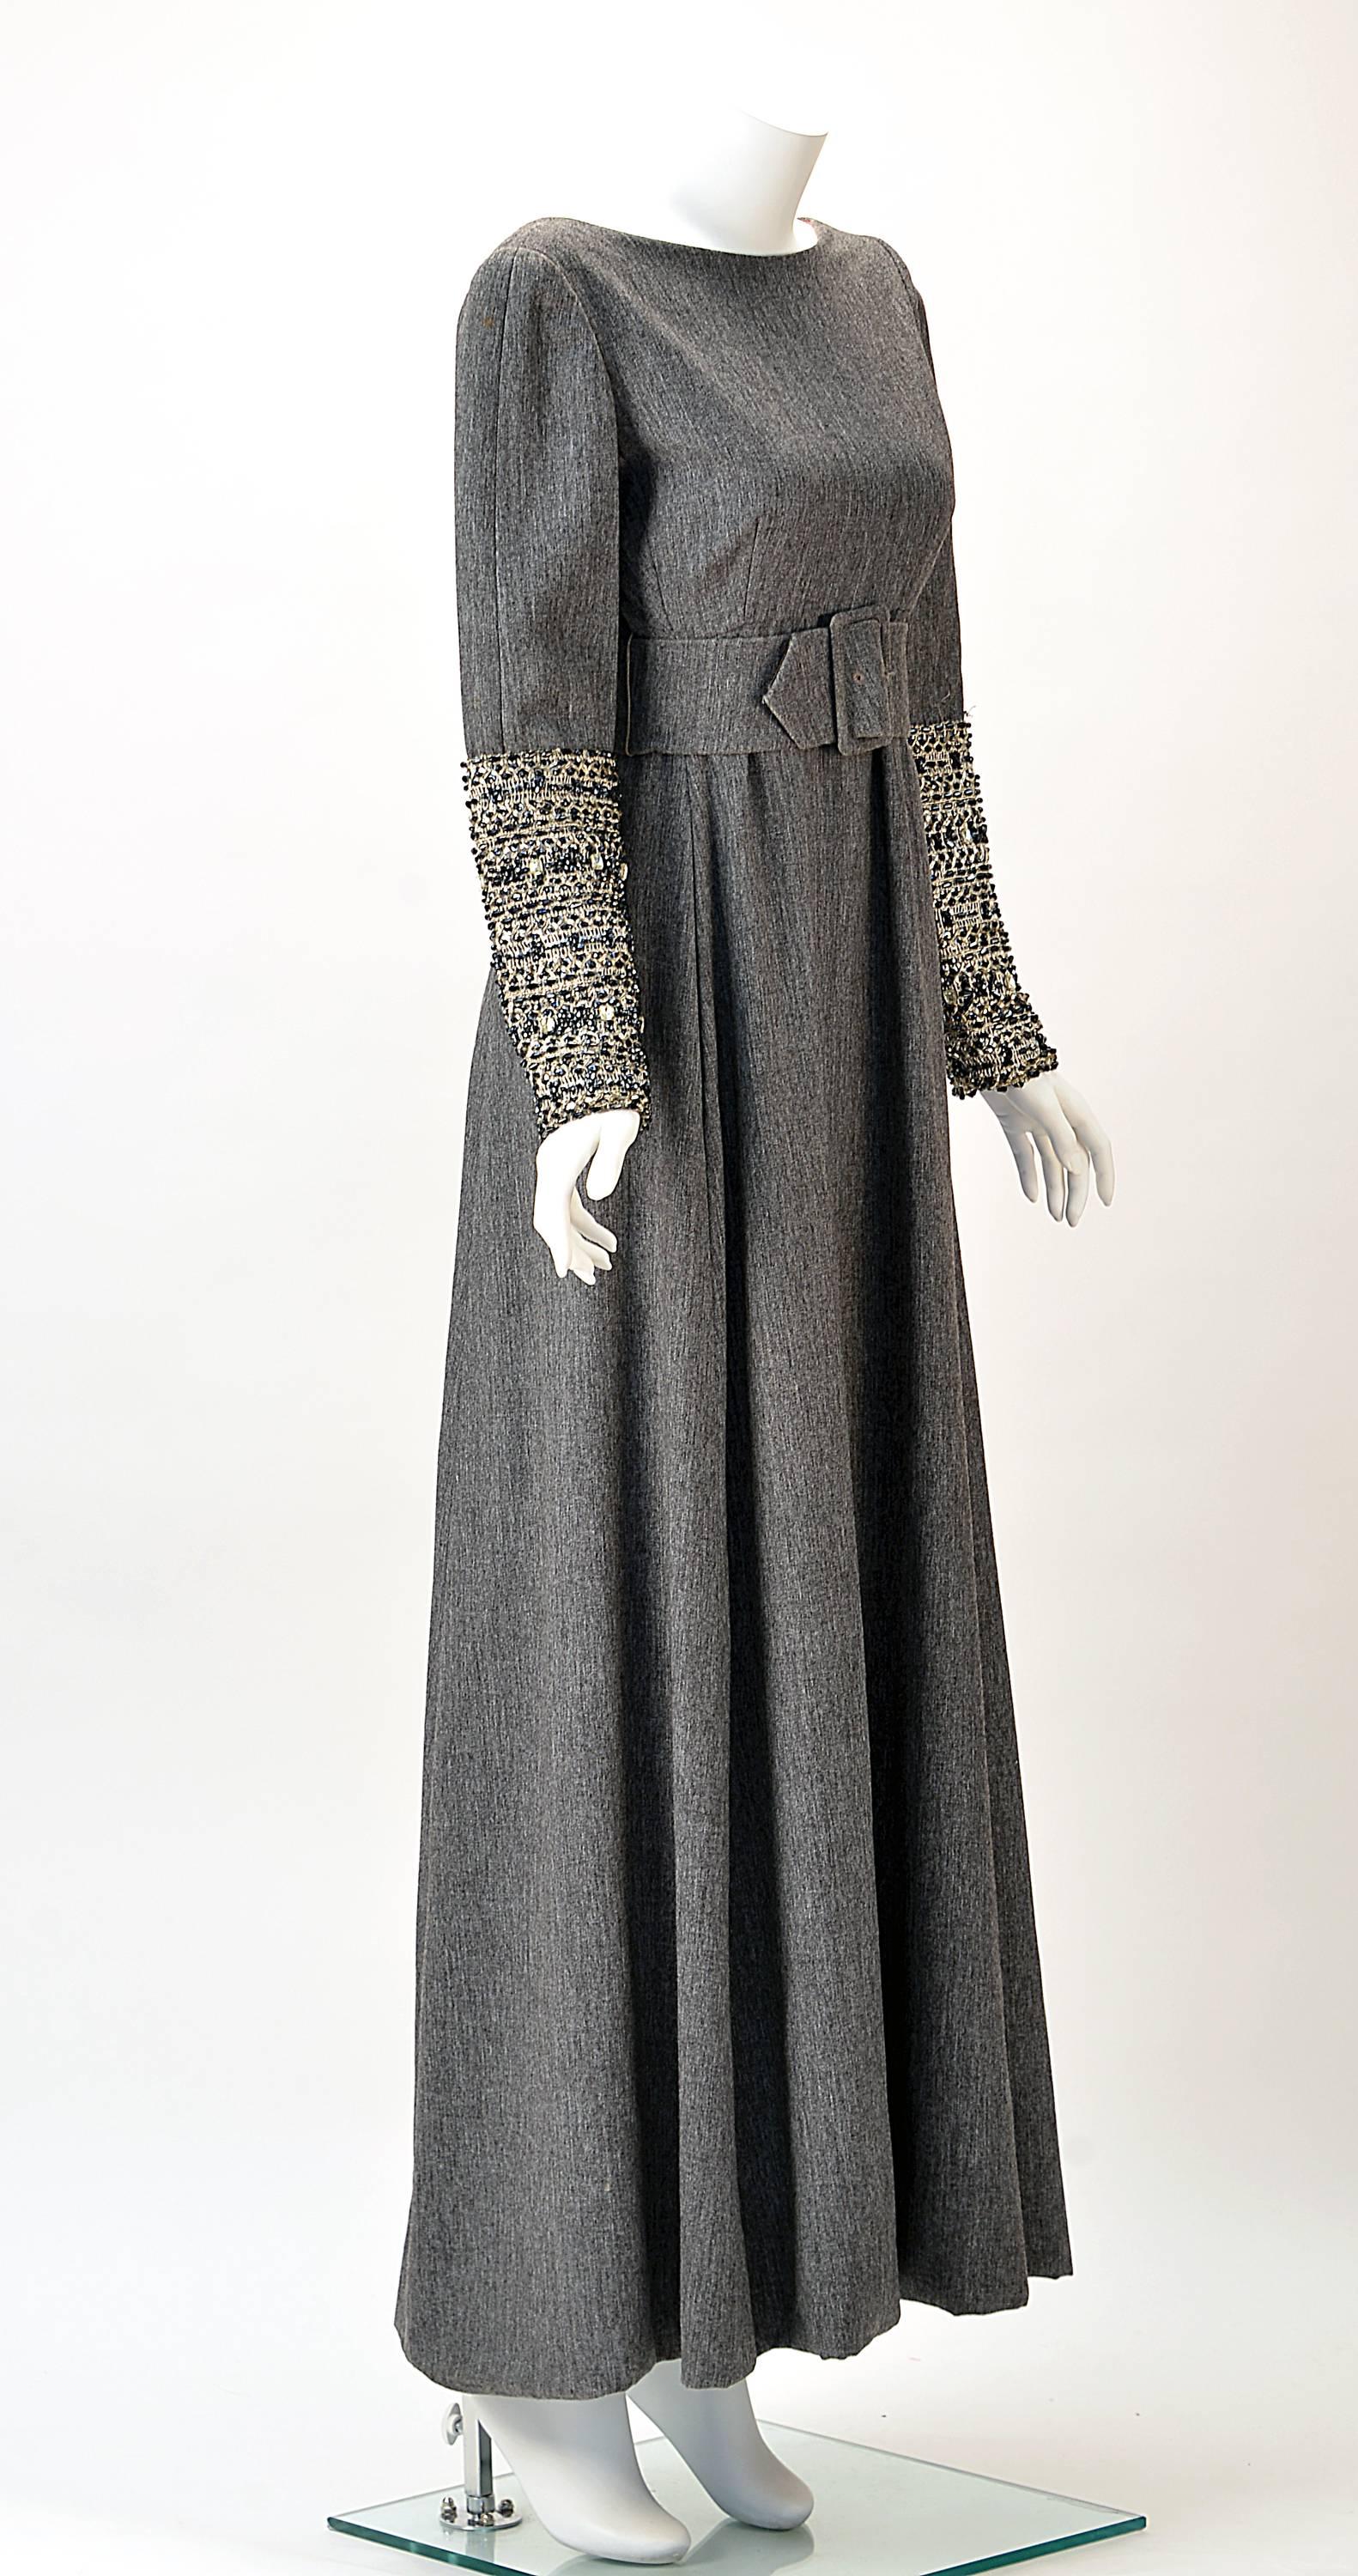 Elegant Malcolm Starr grey wool dress designer by Elinor Simmons. Dress has a low scoop back. Empire waist. Three inch Grey wool belt and buckle. Sleeve  are embellished from elbow down with silver thread and sequins, beads and rhinestones.